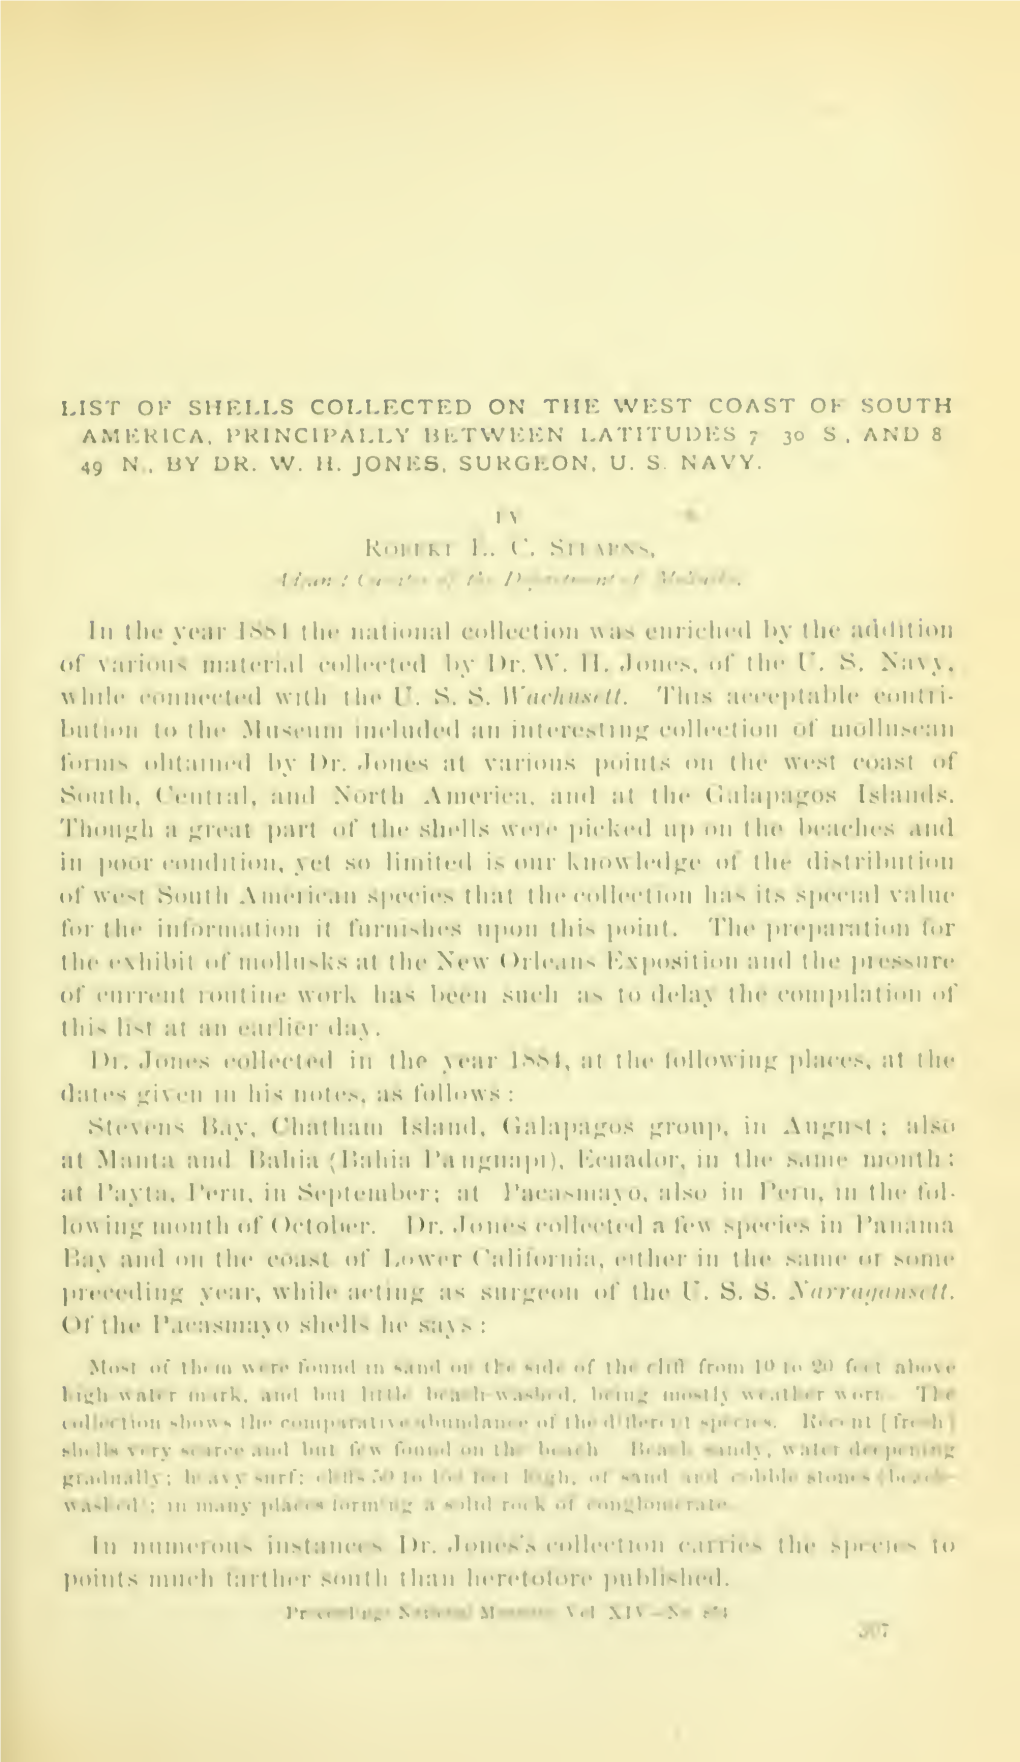 Proceedings of the United States National Museum